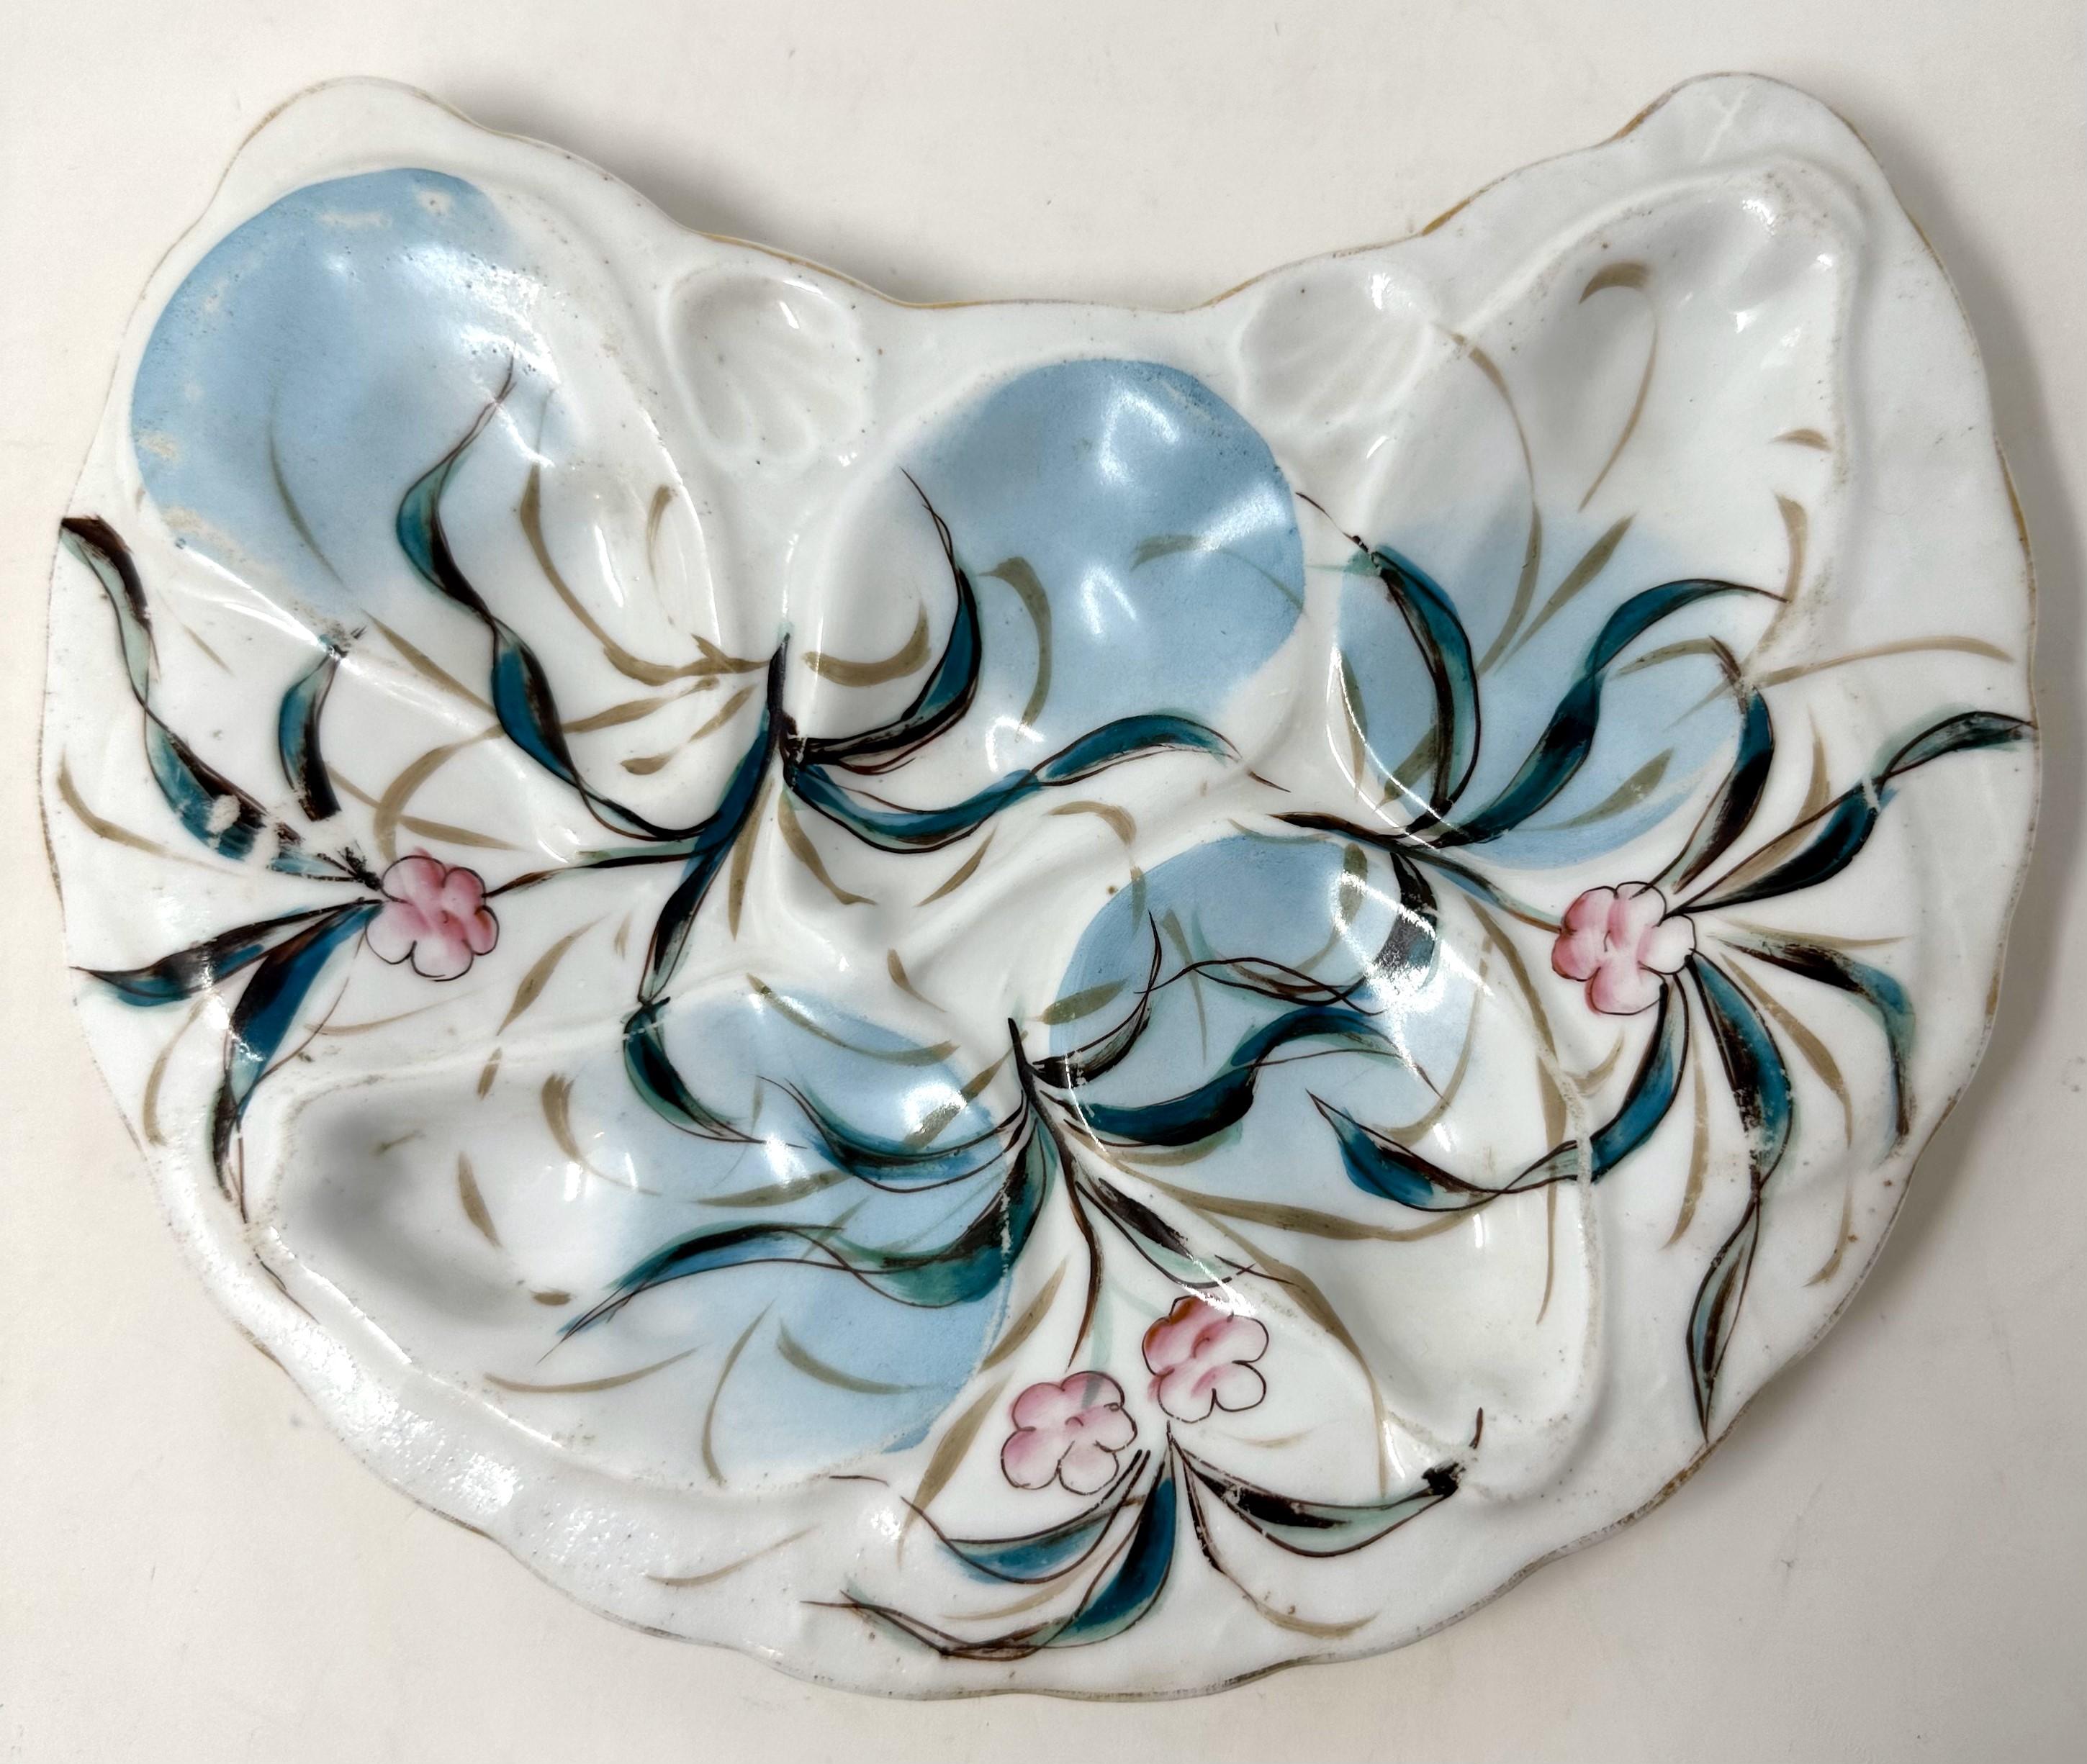 Antique Art Nouveau Continental Porcelain Crescent Shaped Oyster Plate, Circa 1910.
Hand-Painted Sea Grasses and Flowers in Blue Turquoise and Pink on a White Background.